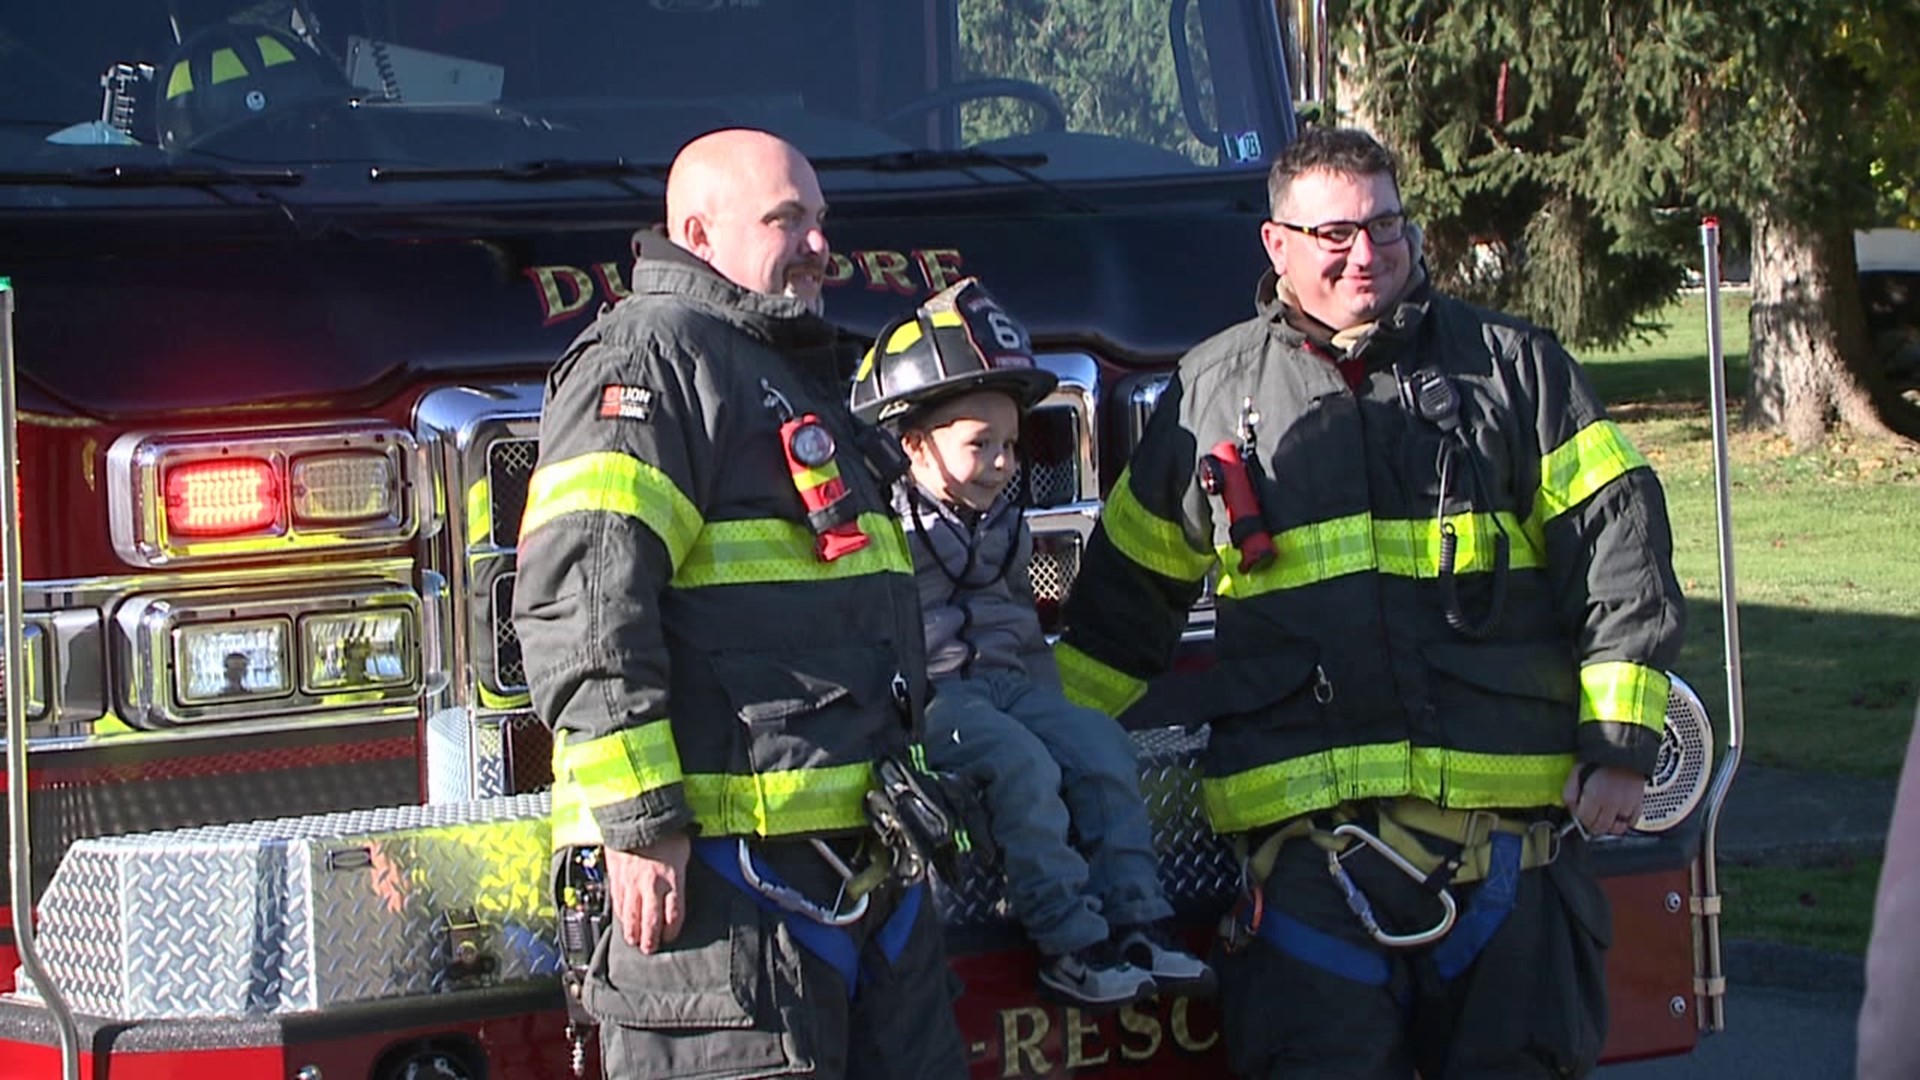 A Lackawanna County child got a special homecoming surprise after battling cancer.